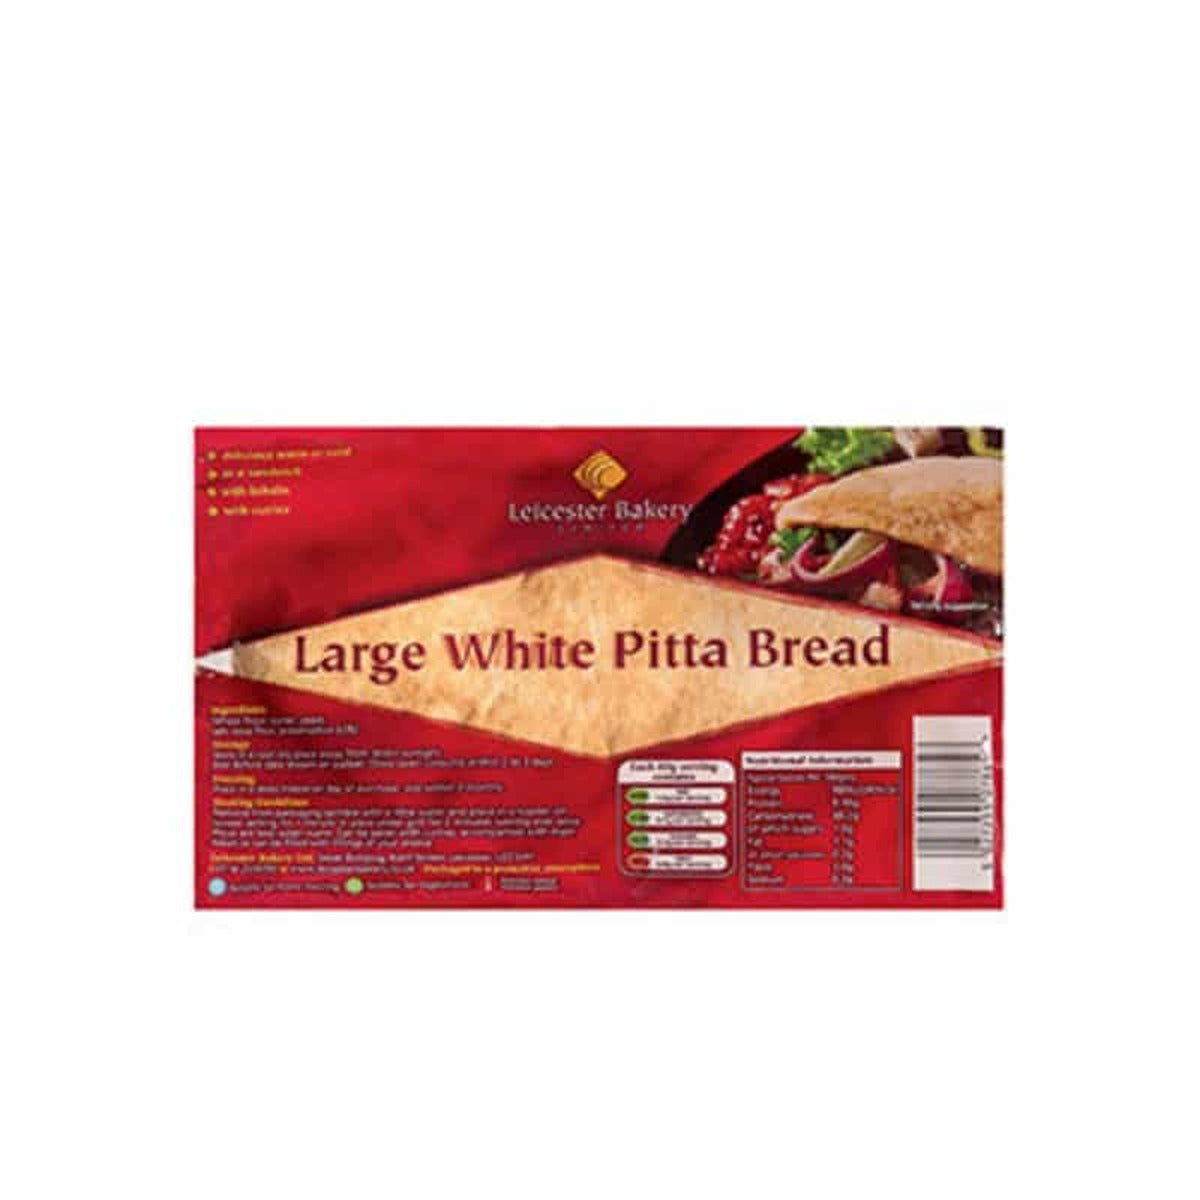 Leicester Bakery - Large White Pitta Bread - 6 Pack - Continental Food Store